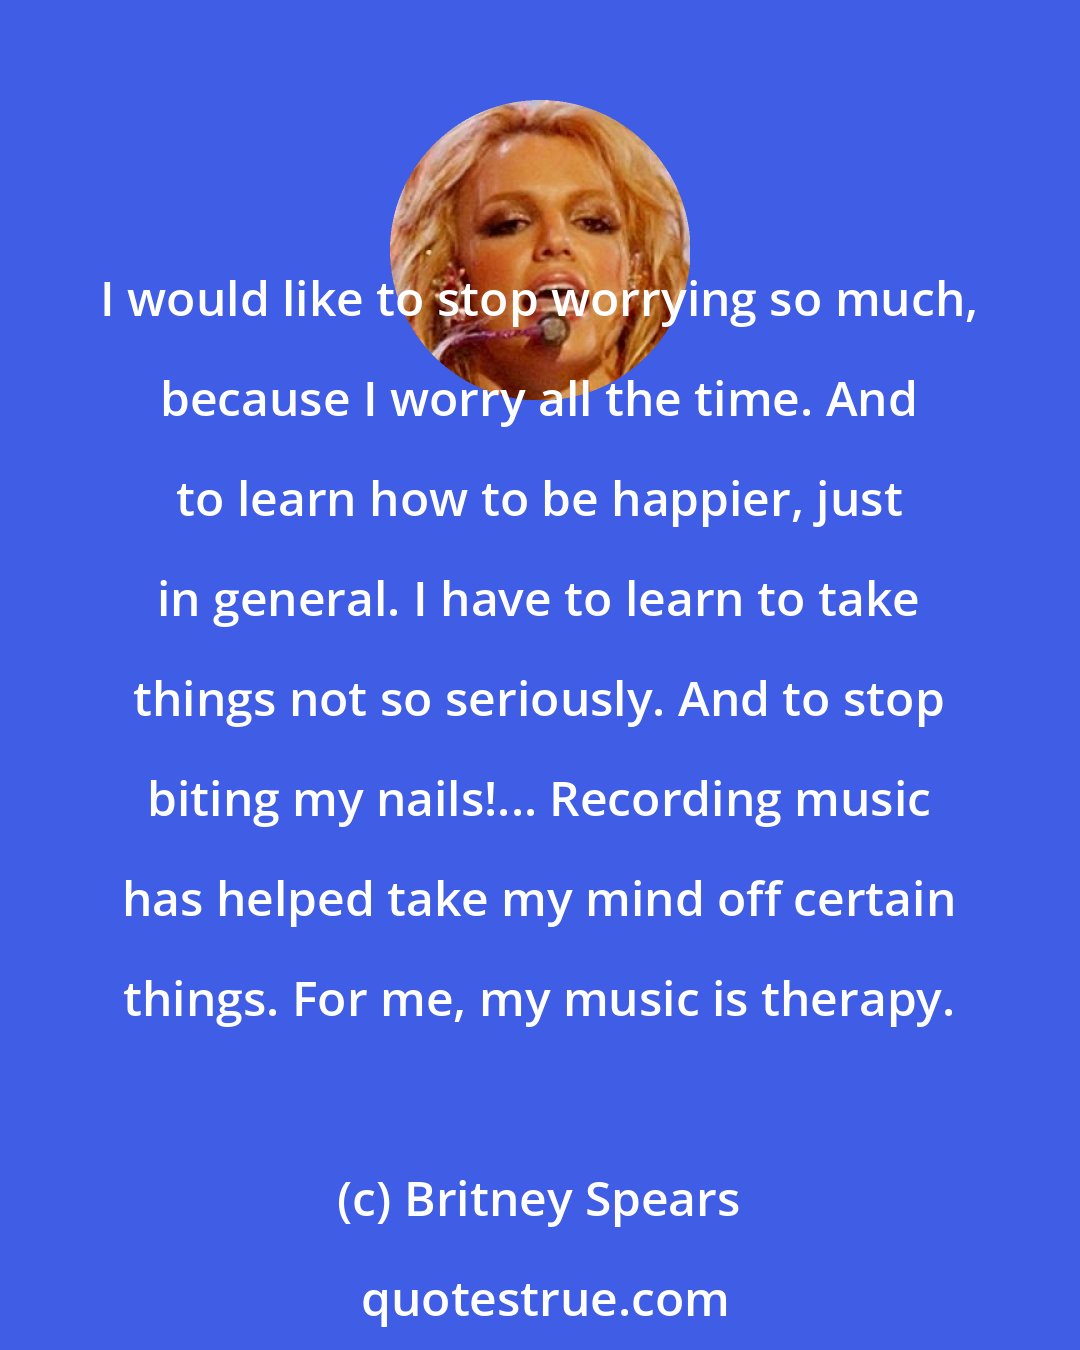 Britney Spears: I would like to stop worrying so much, because I worry all the time. And to learn how to be happier, just in general. I have to learn to take things not so seriously. And to stop biting my nails!... Recording music has helped take my mind off certain things. For me, my music is therapy.